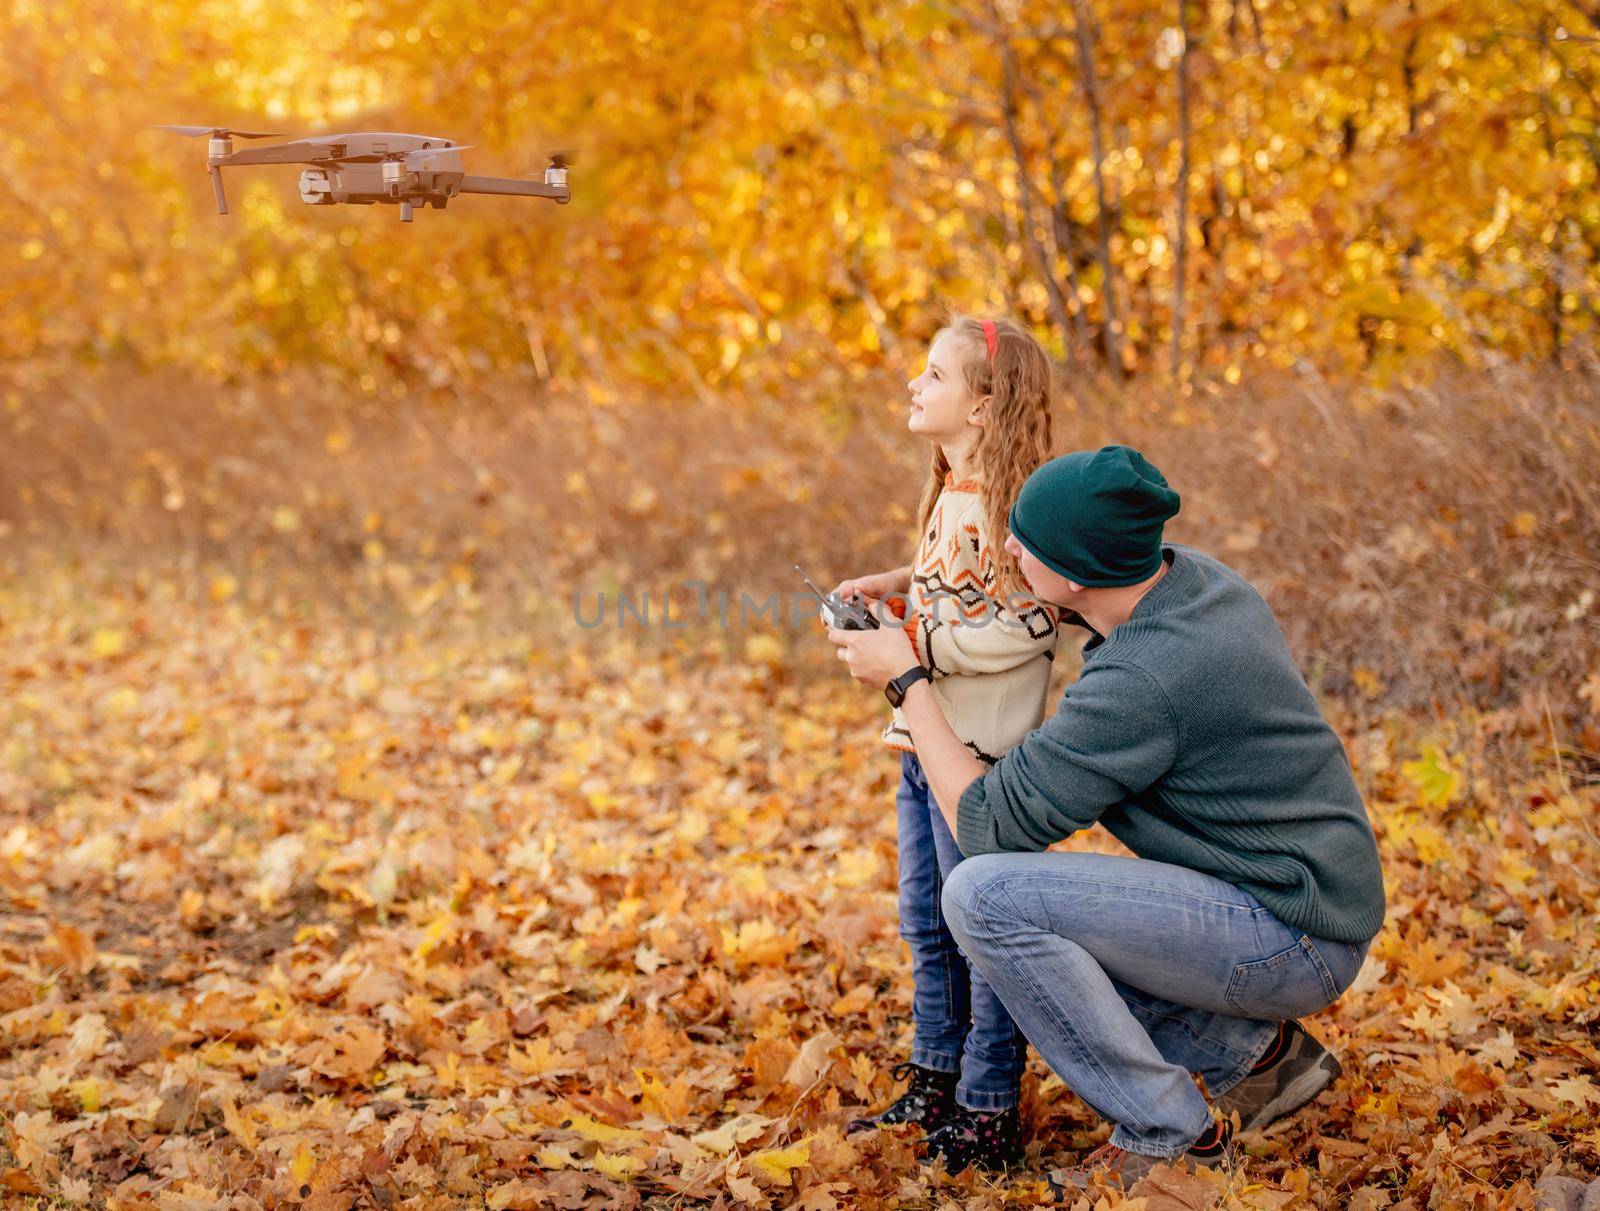 Father and daughter launch quadrocopter in autumn park